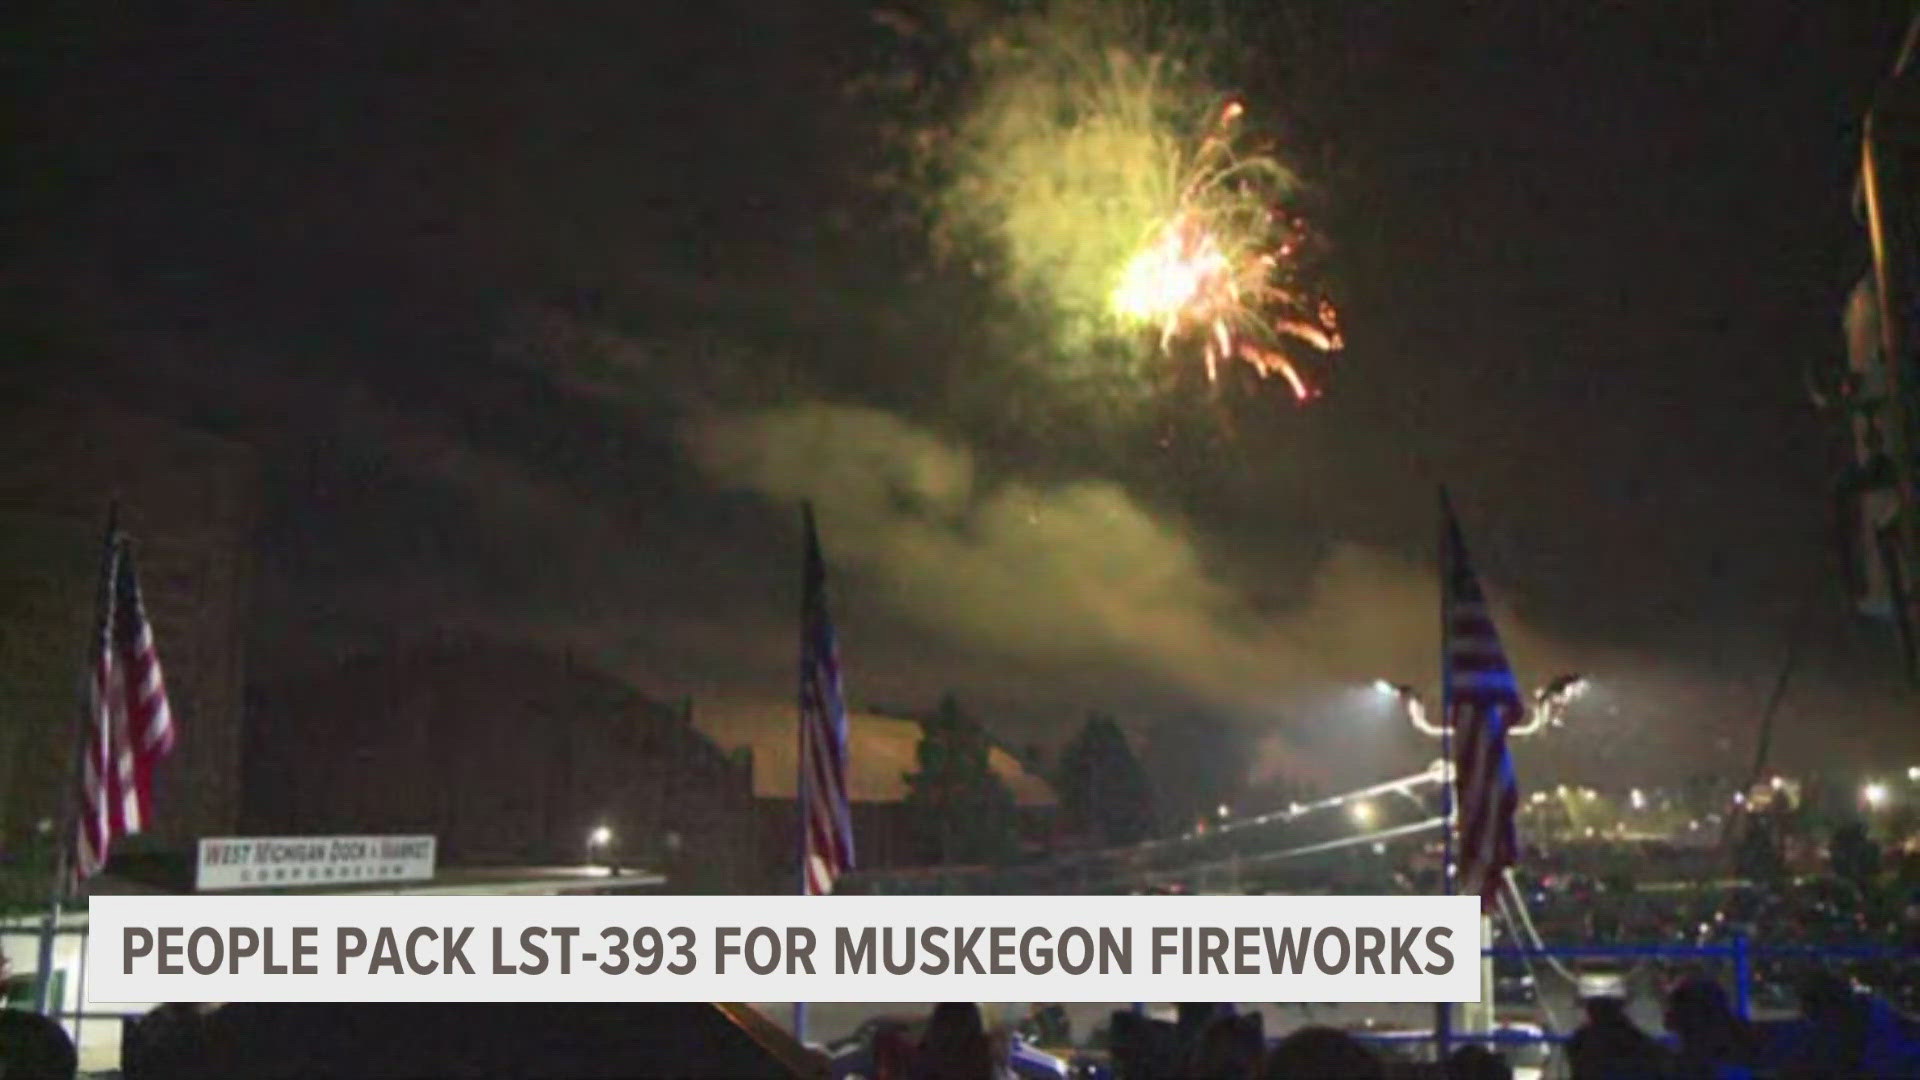 13 ON YOUR SIDE talked to a Navy veteran who has been coming to watch the fireworks in Muskegon aboard the LST-393 for 25 years.